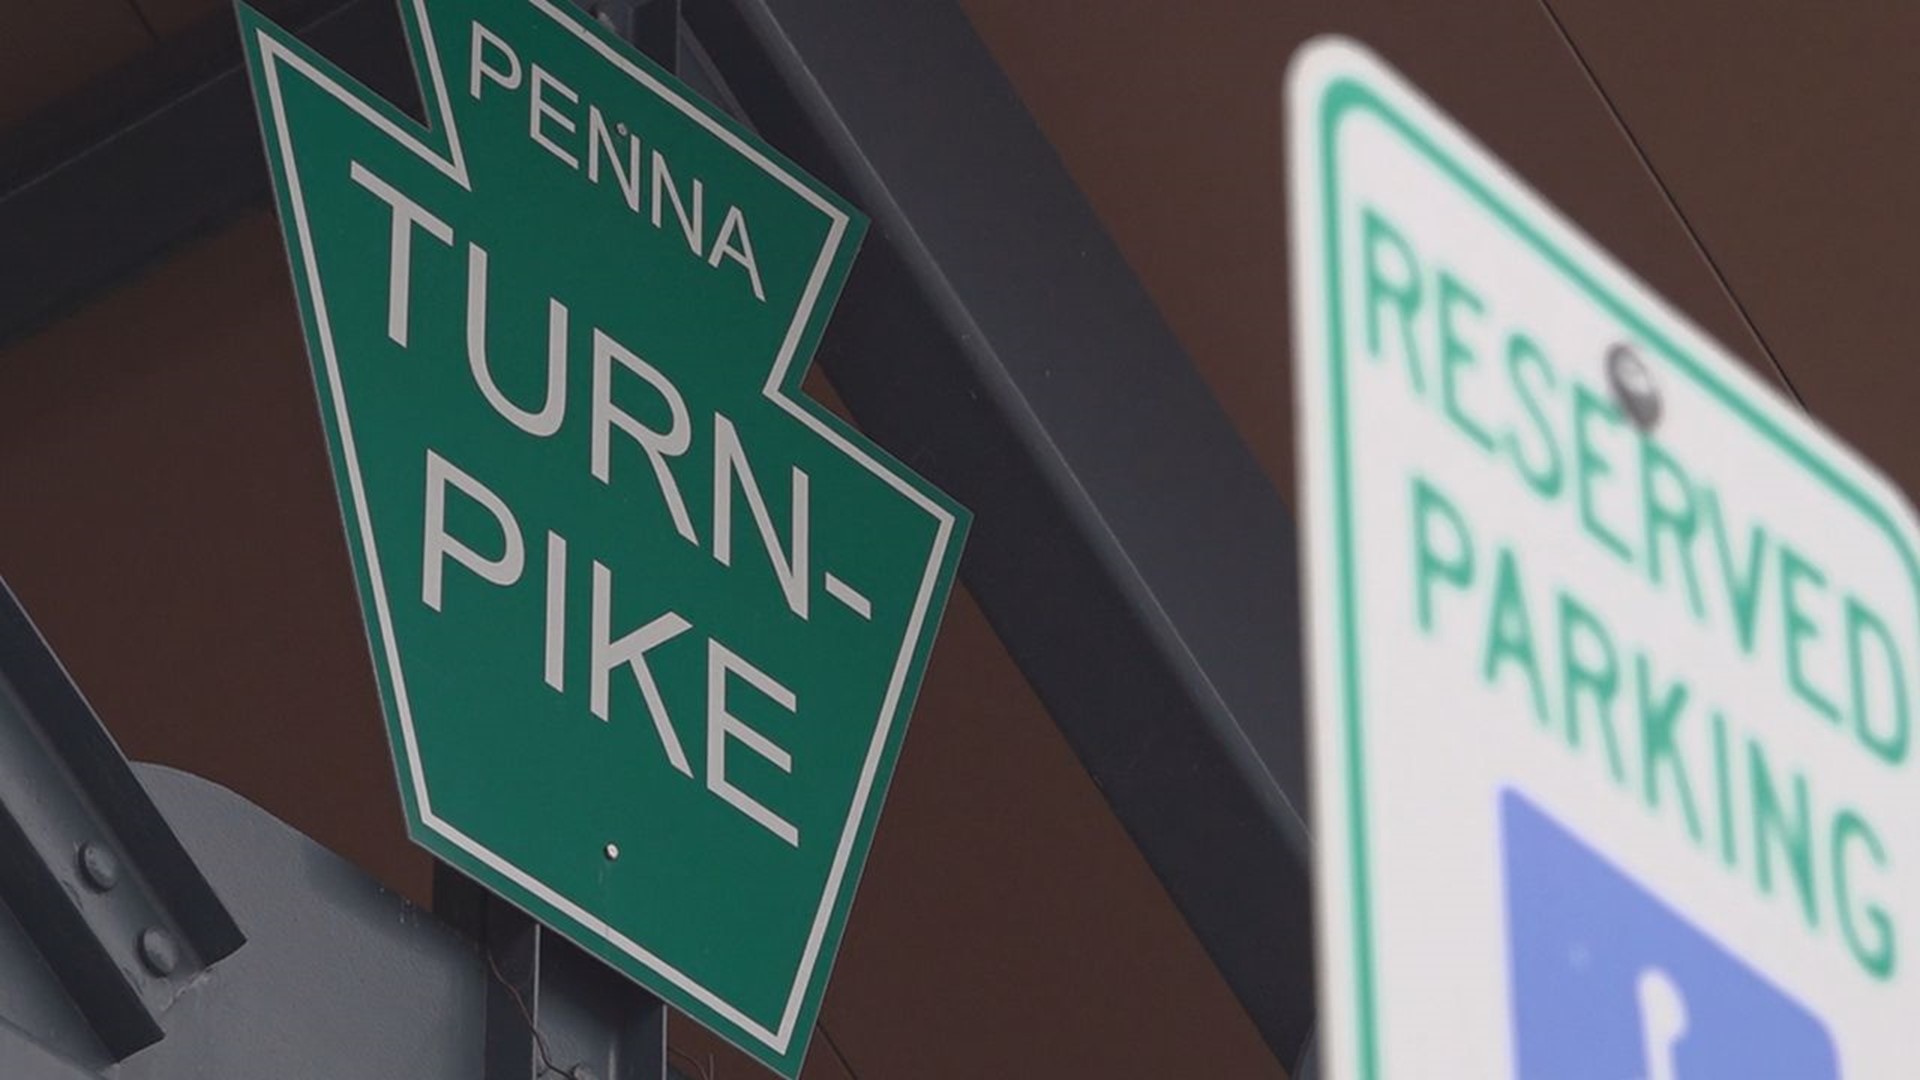 Howto correctly mount your - Pennsylvania Turnpike